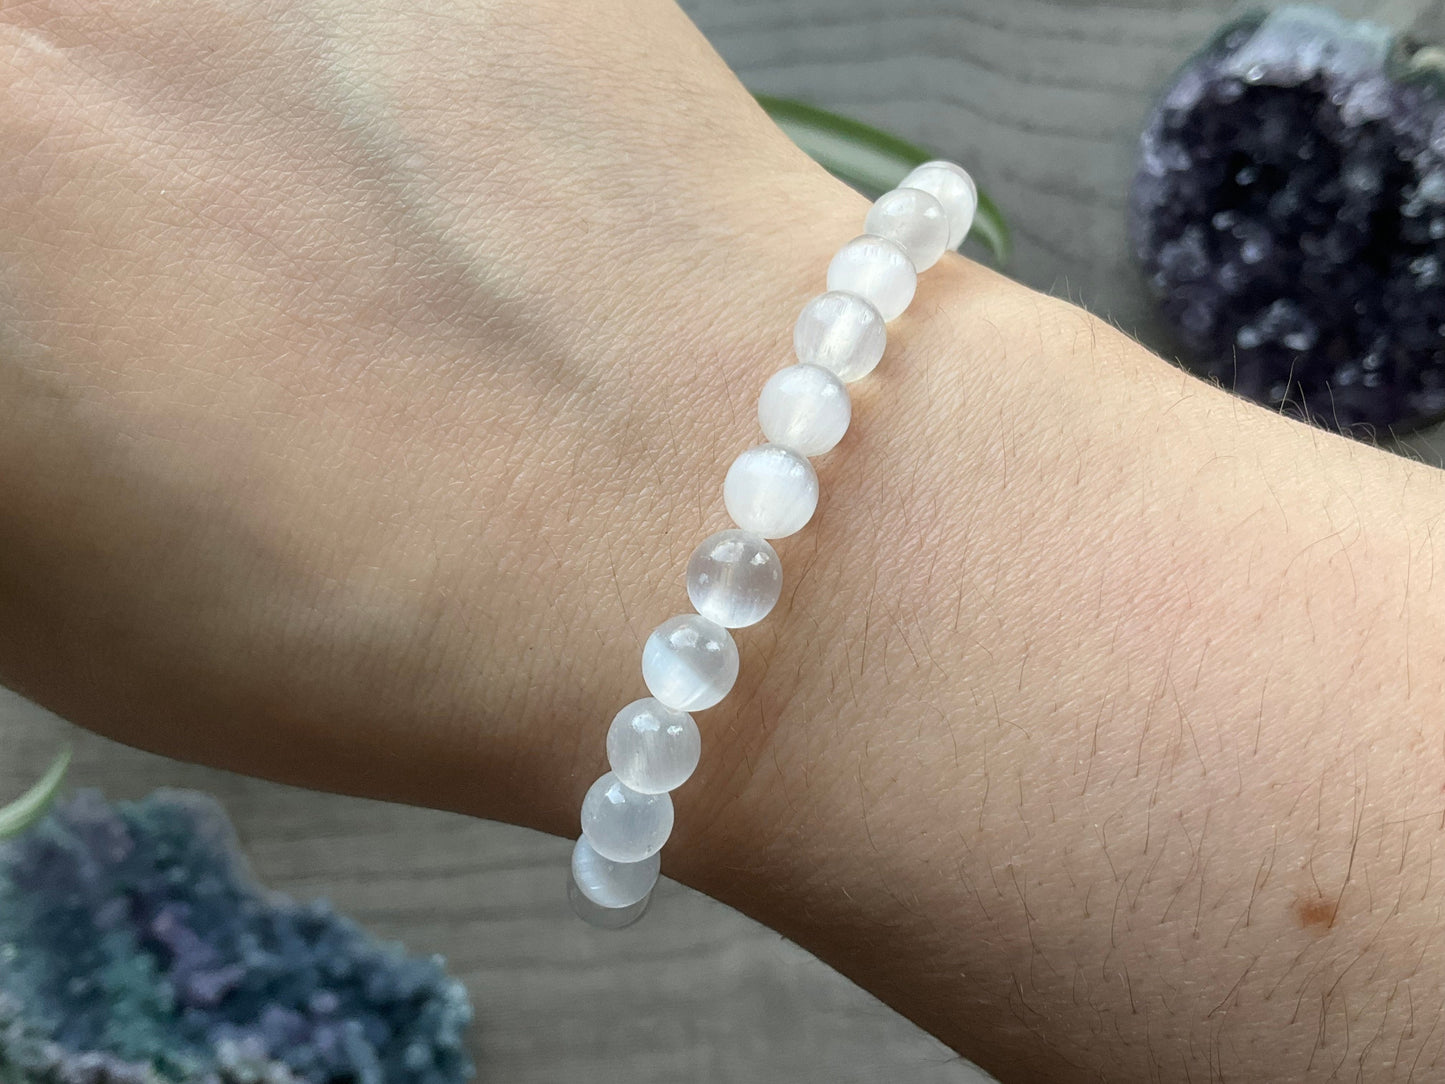 Pictured is a selenite bead bracelet.